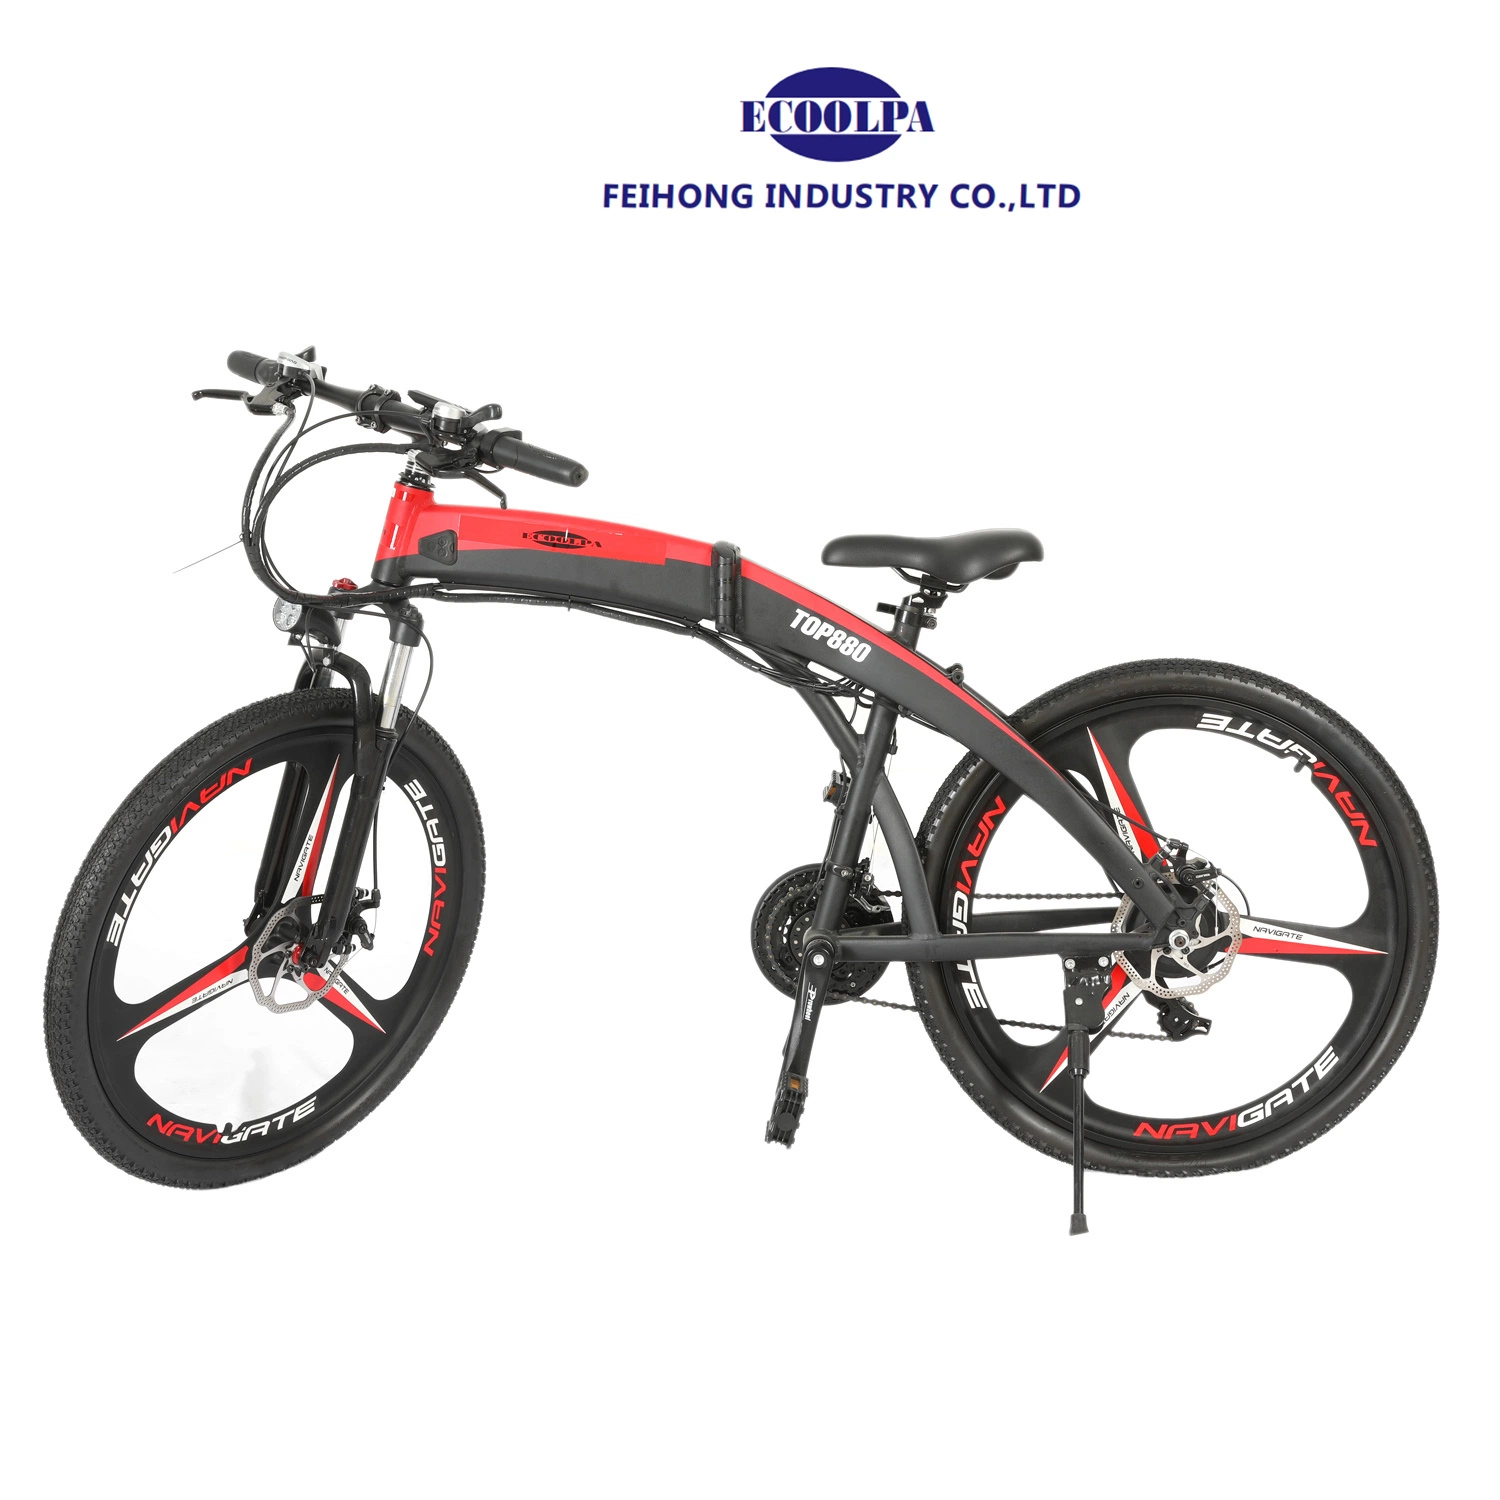 26inch Motorcycle Electric Scooter Bicycle Electric Bike Electric Motorcycle Scooter Motor Scooter Electric Mountain Bike Detachable Battery 36V 7.8ah